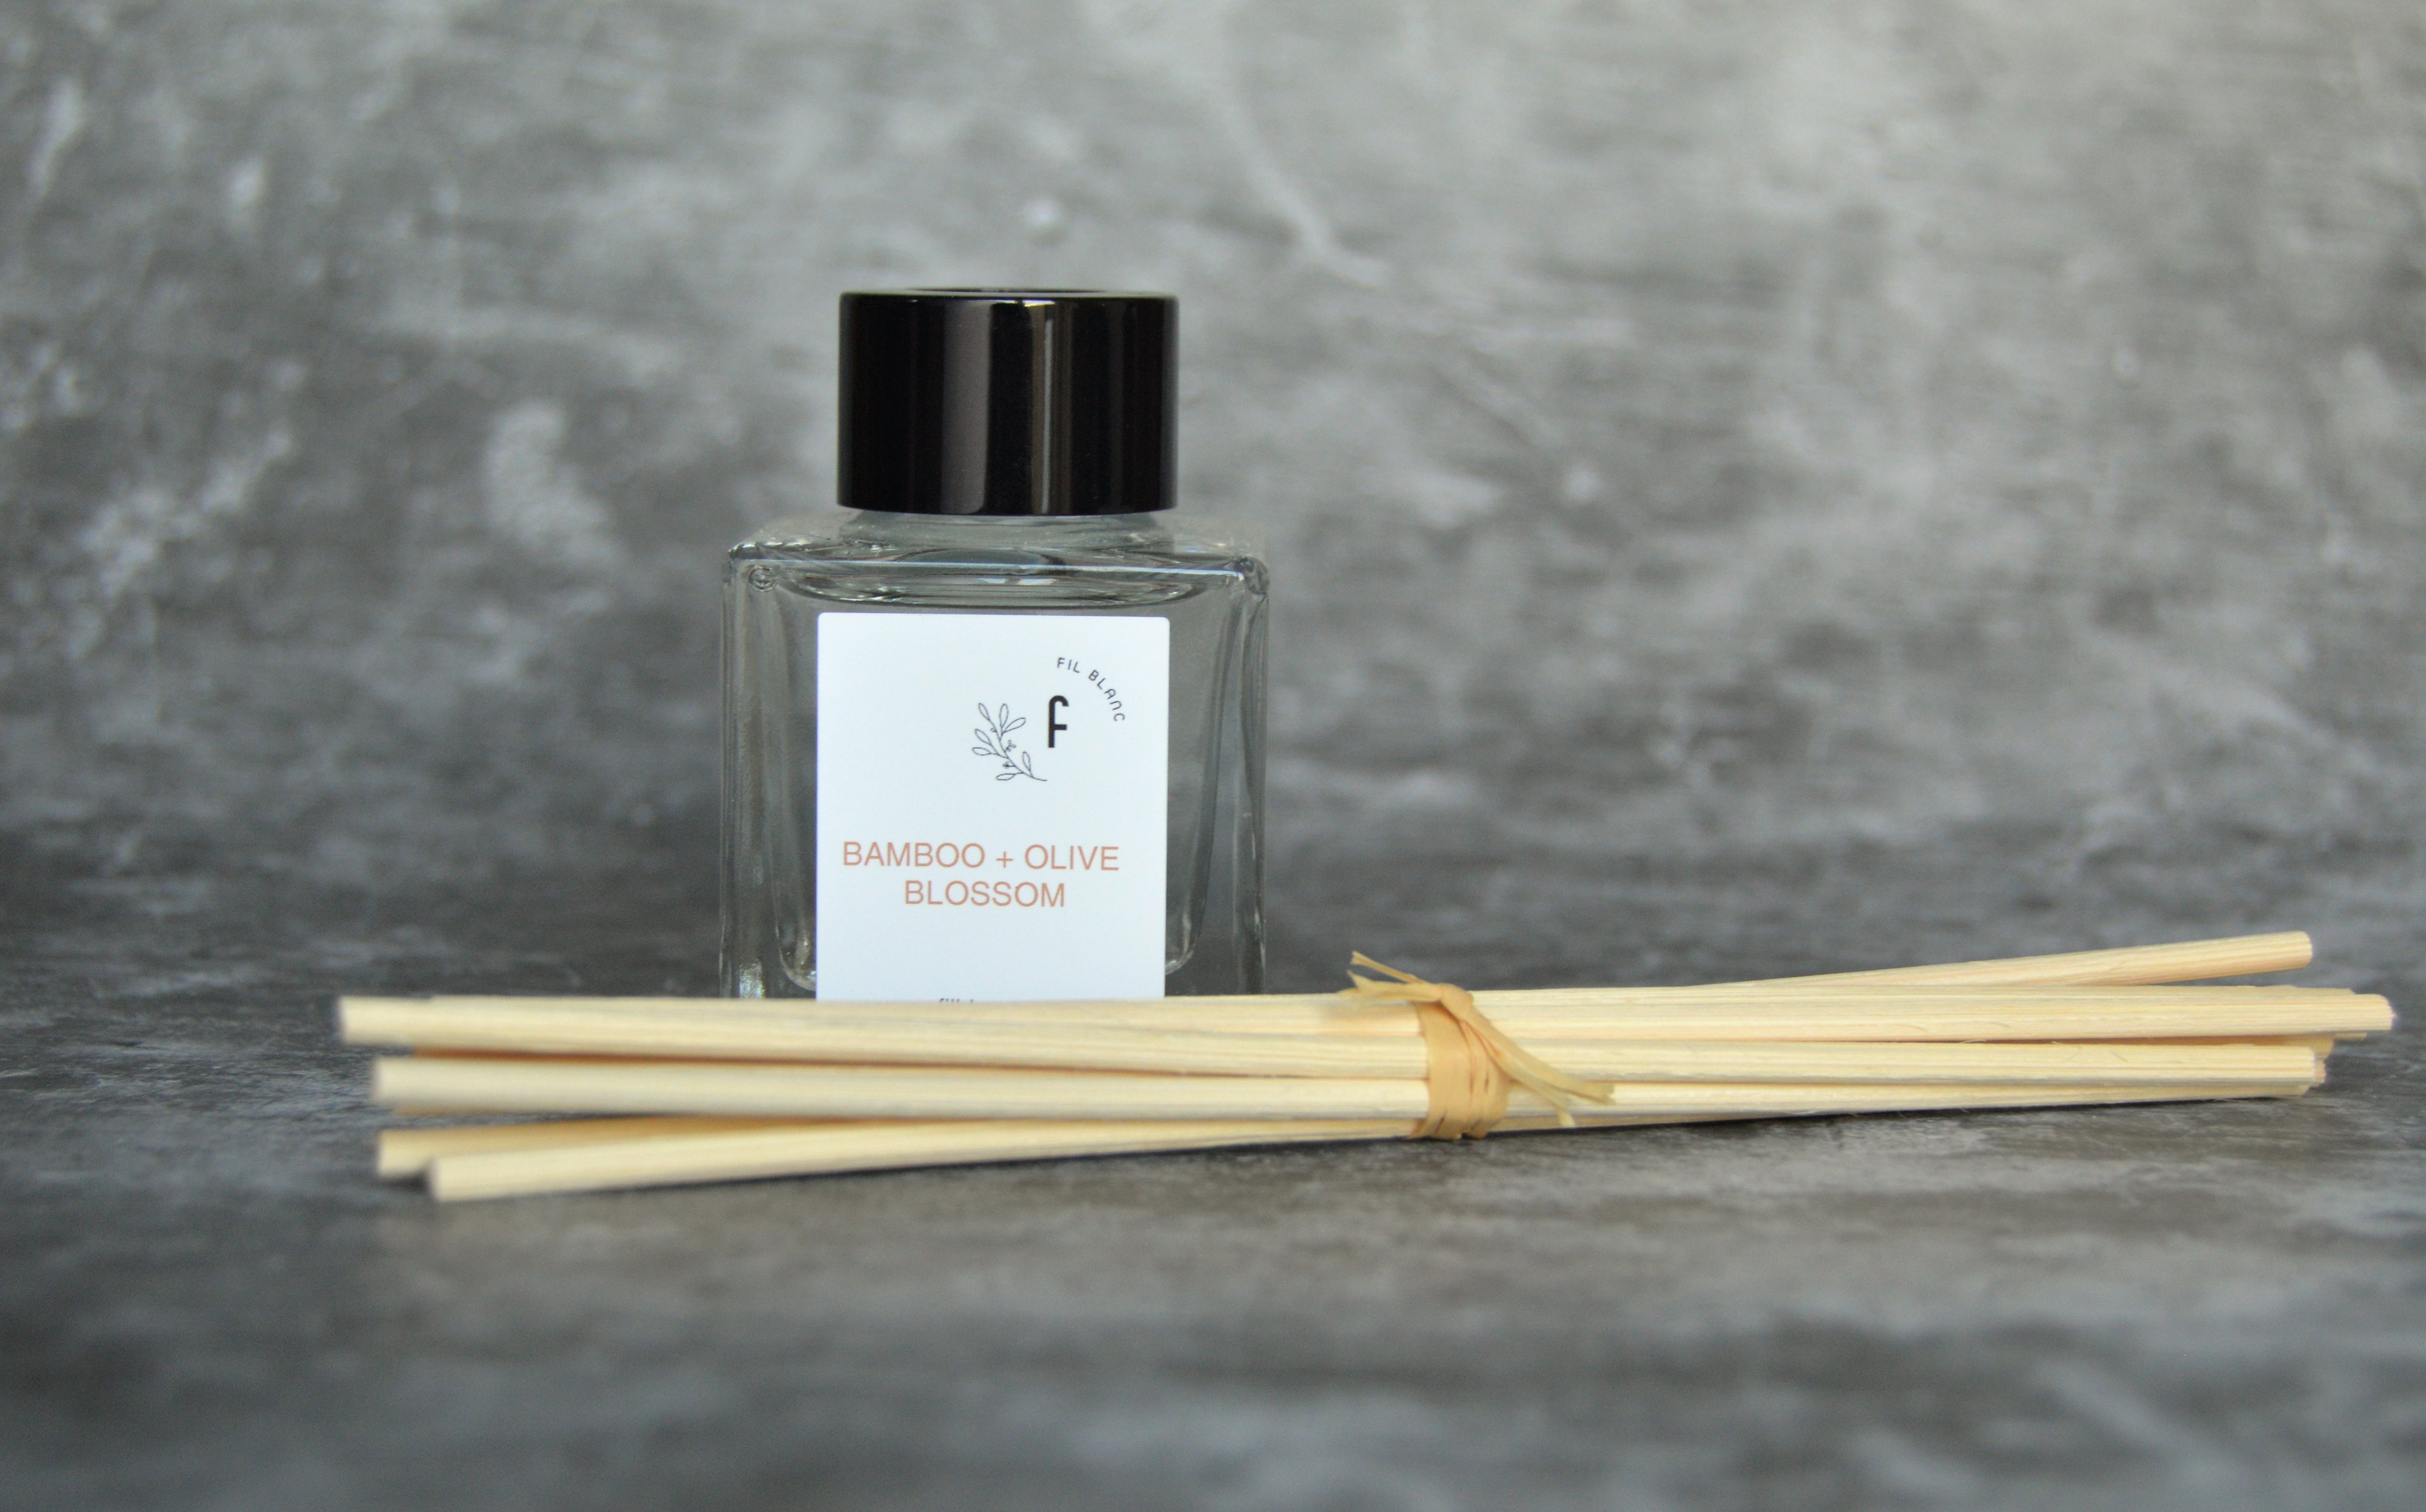 Bamboo and Olive Blossom Reed Diffuser Kit 50 ml